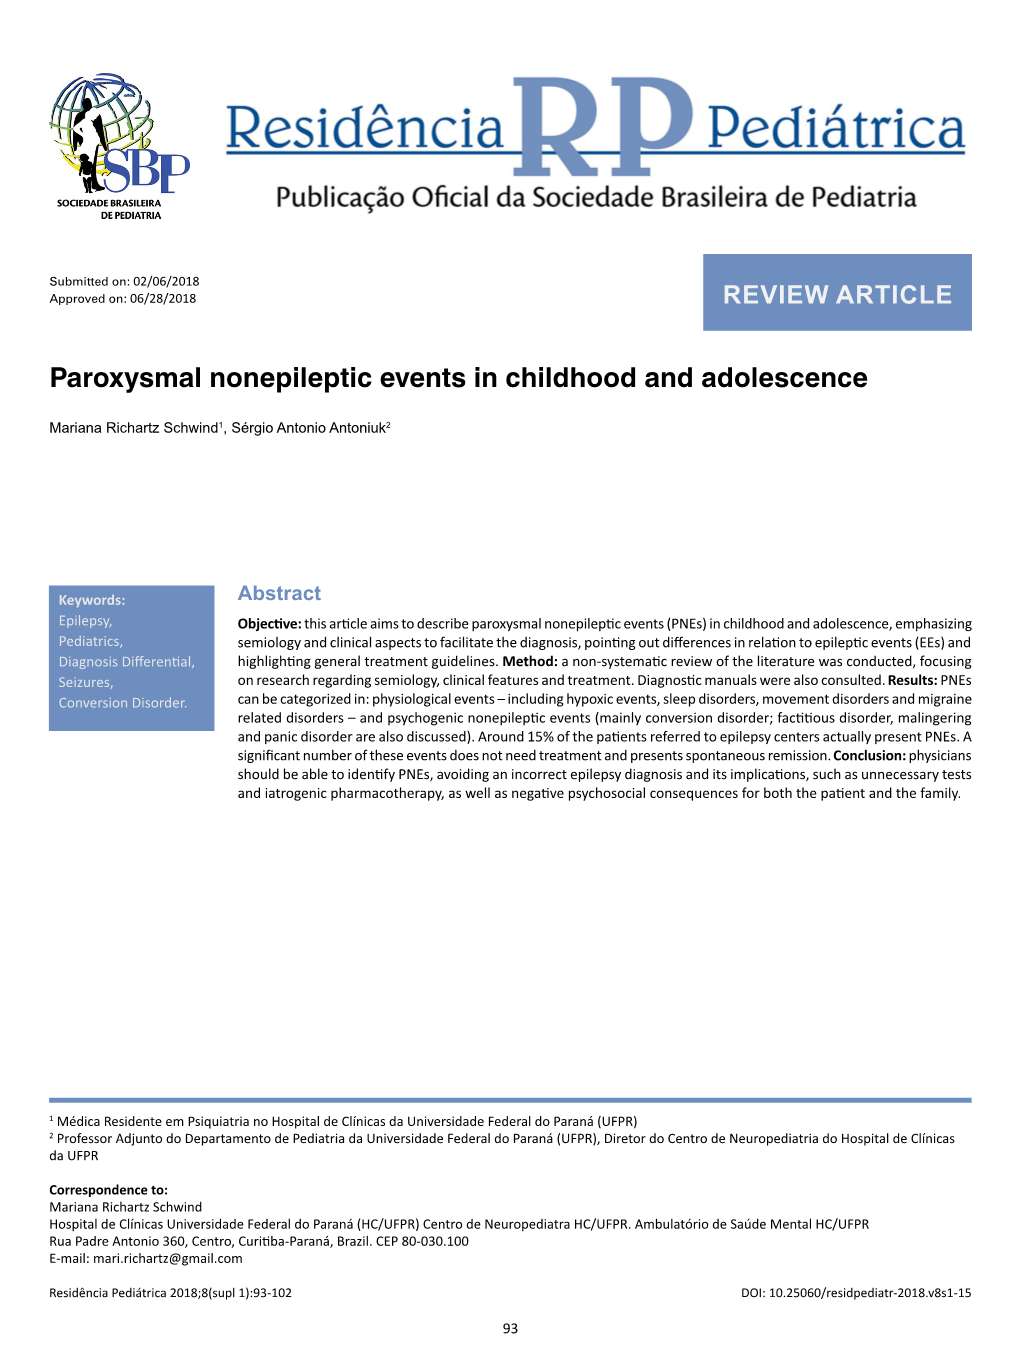 Paroxysmal Nonepileptic Events in Childhood and Adolescence